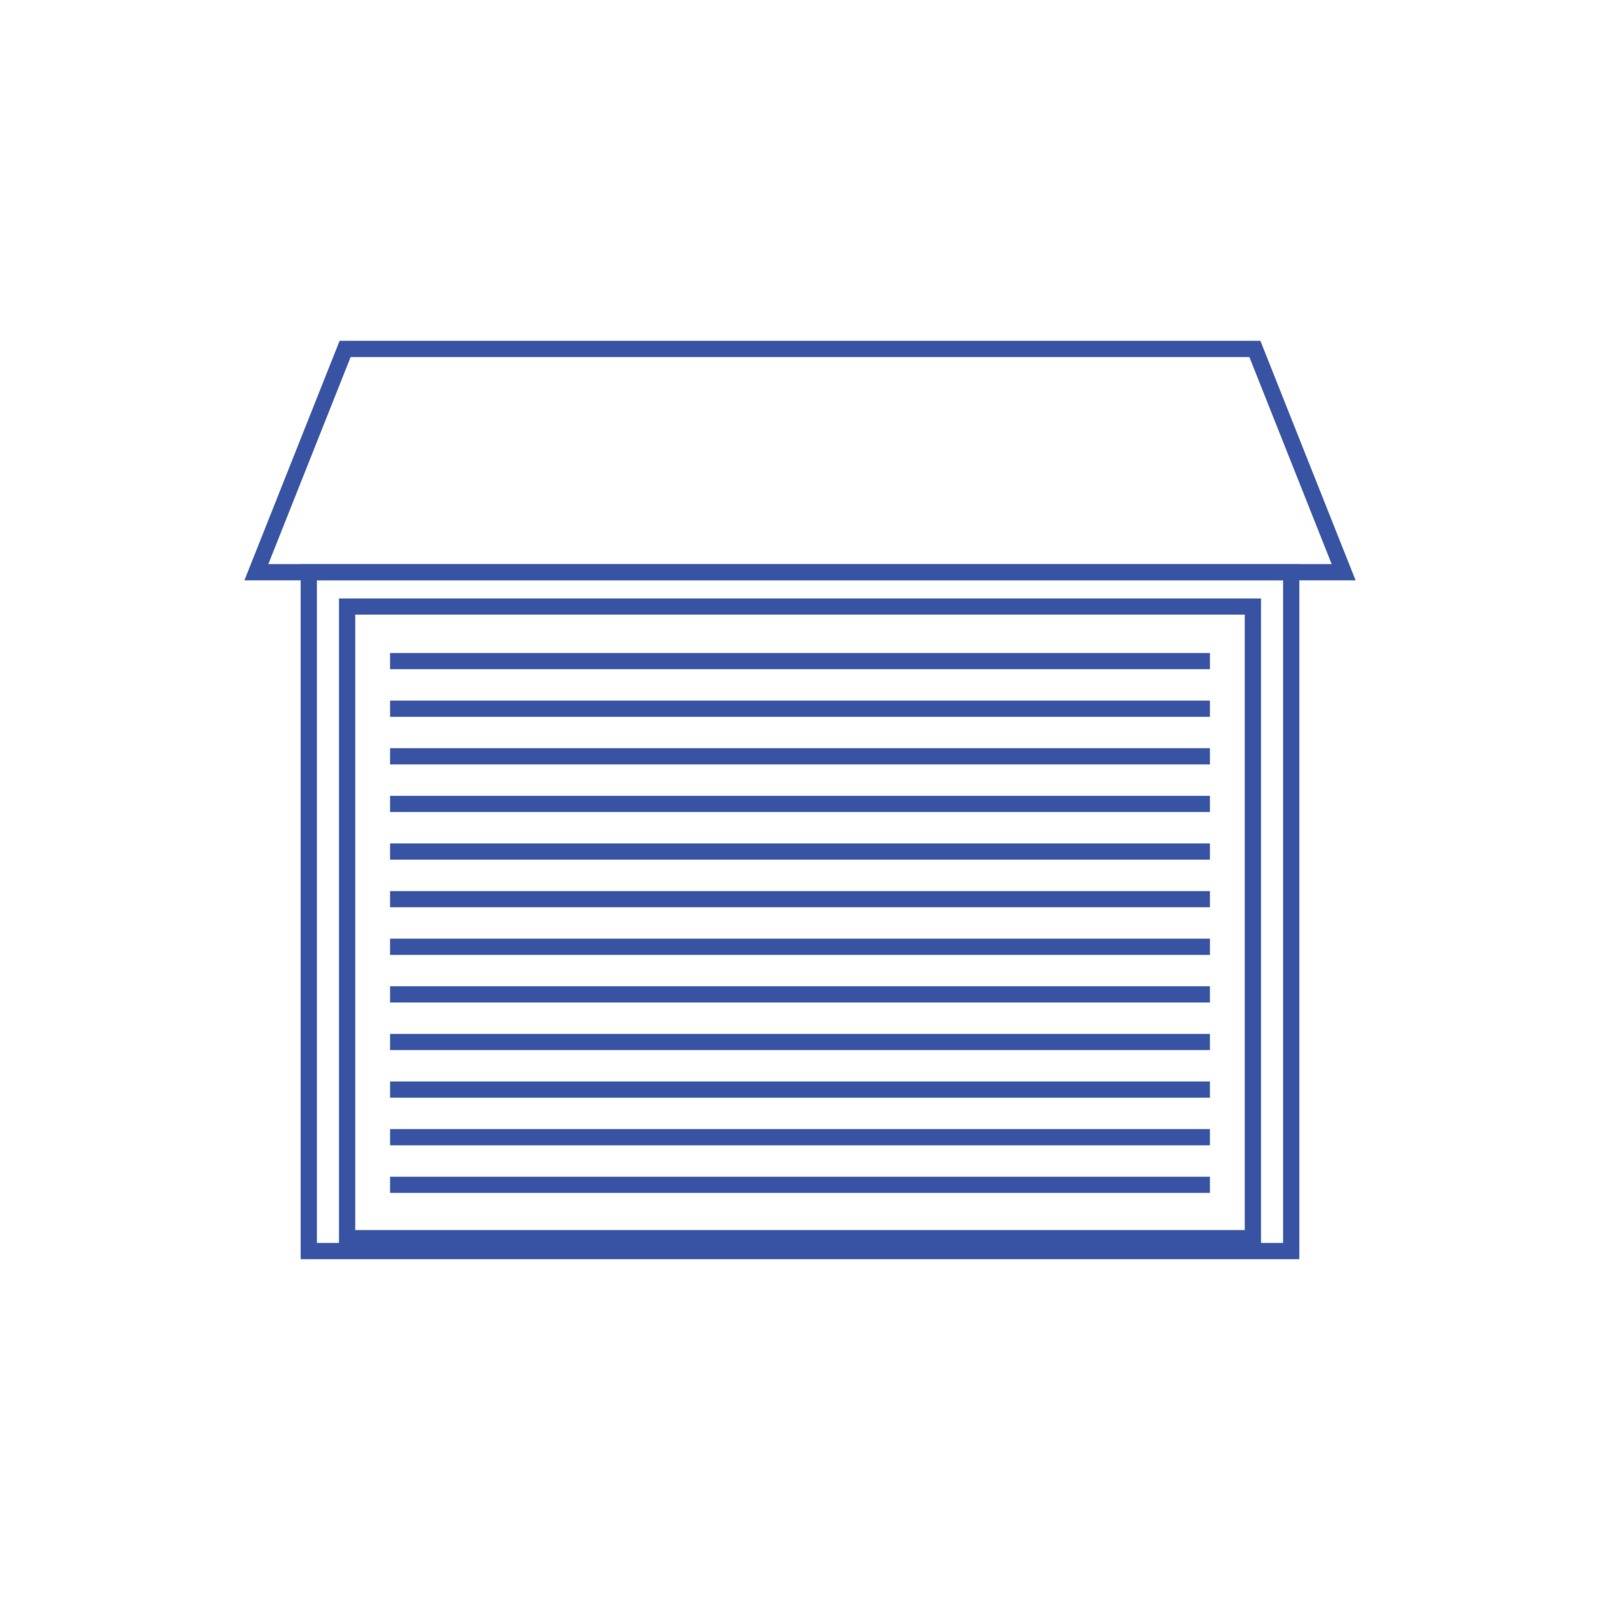 Thin line house icon by ang_bay